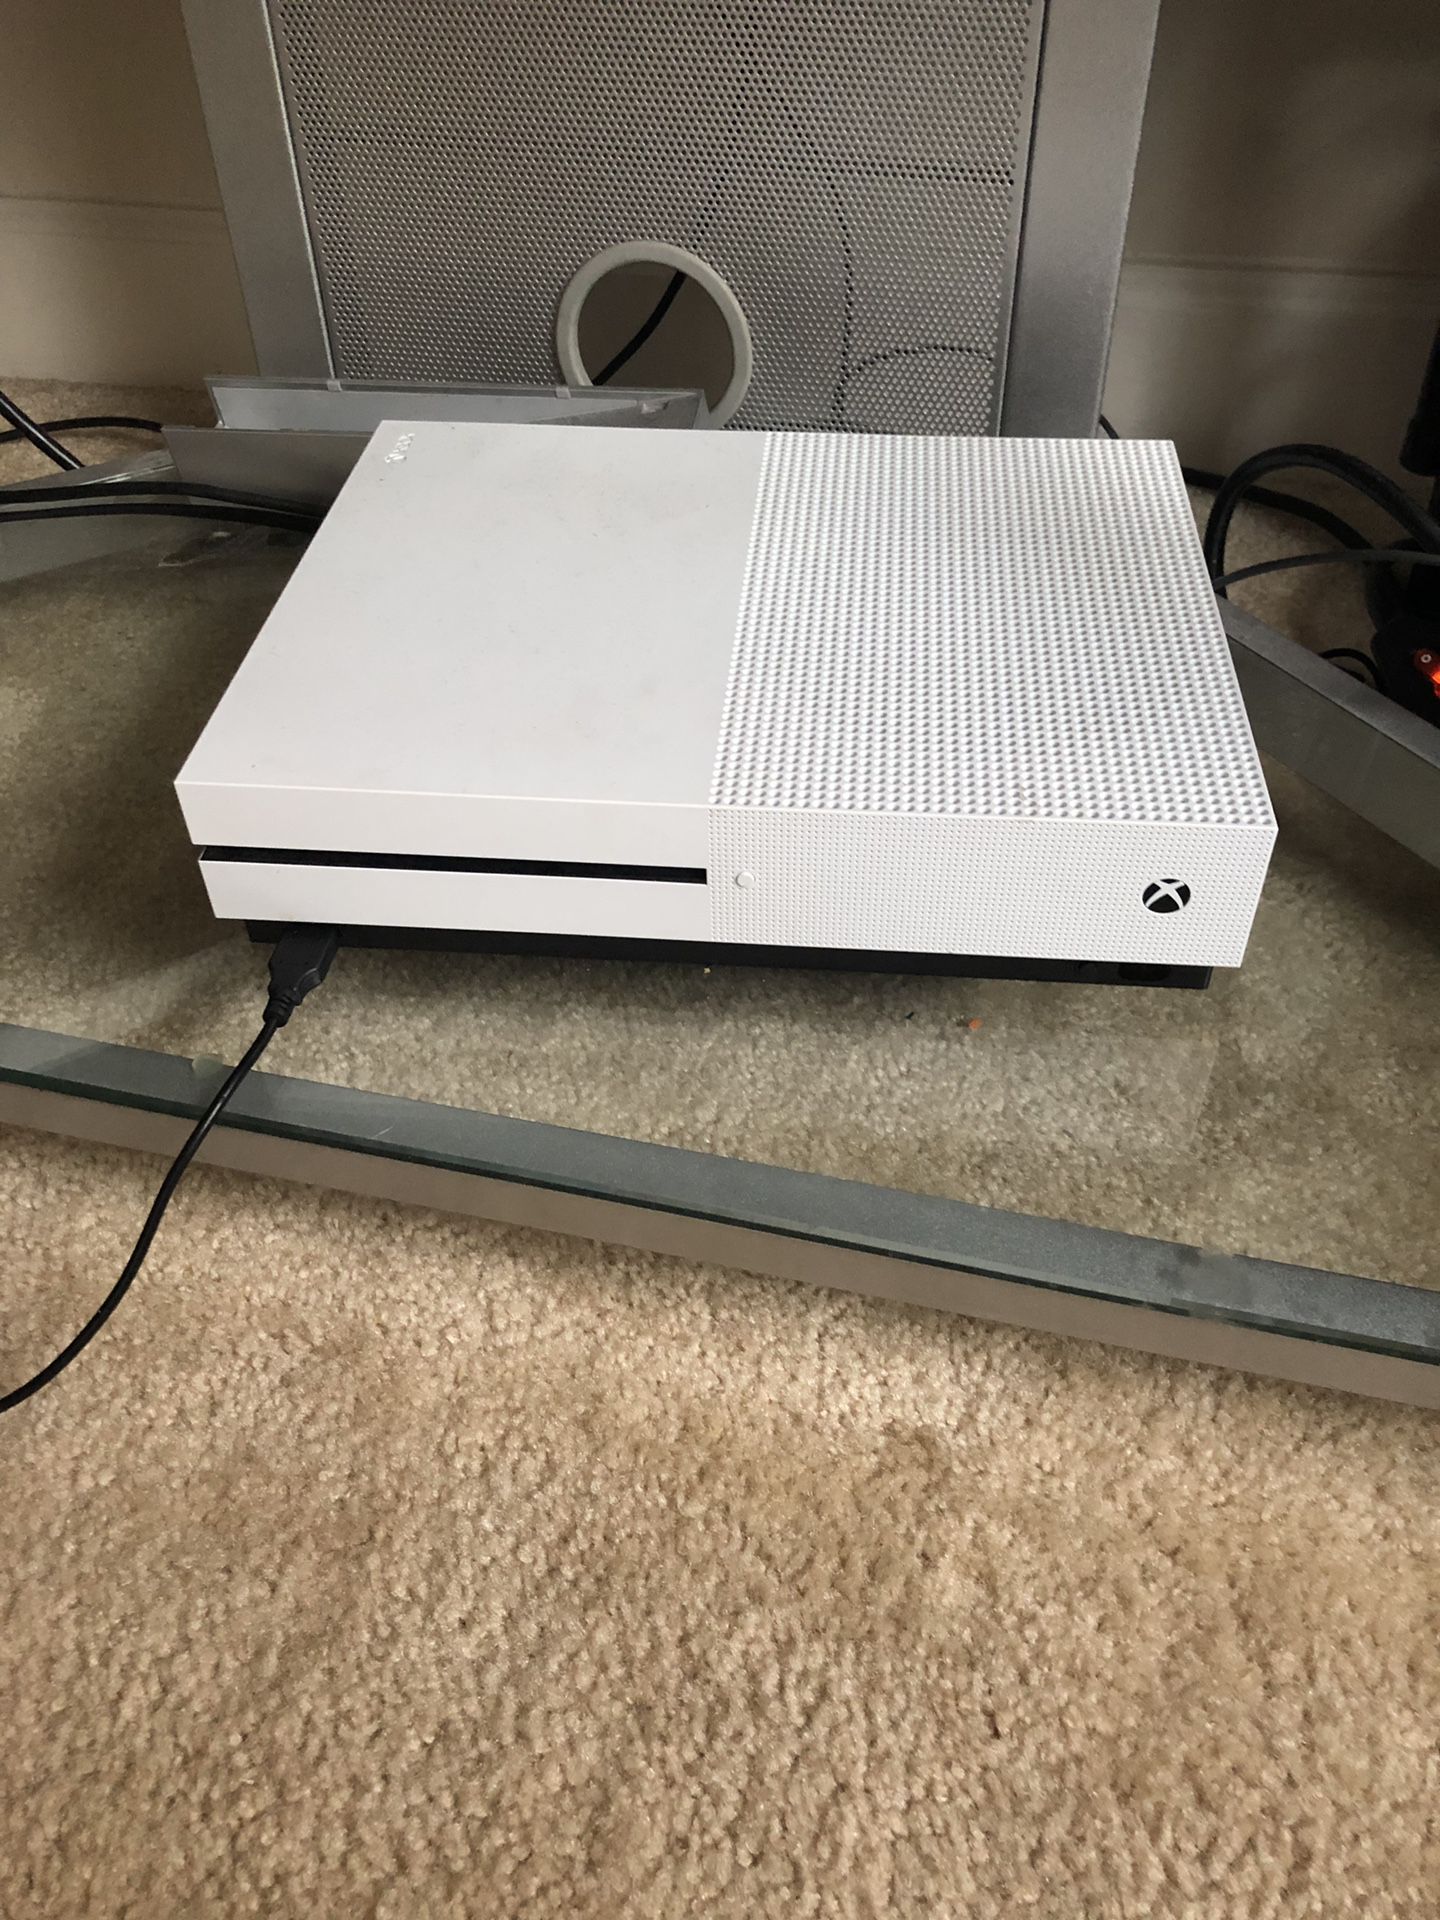 Xbox one s 1TB 150$ 2 controllers/ 1 wired controller